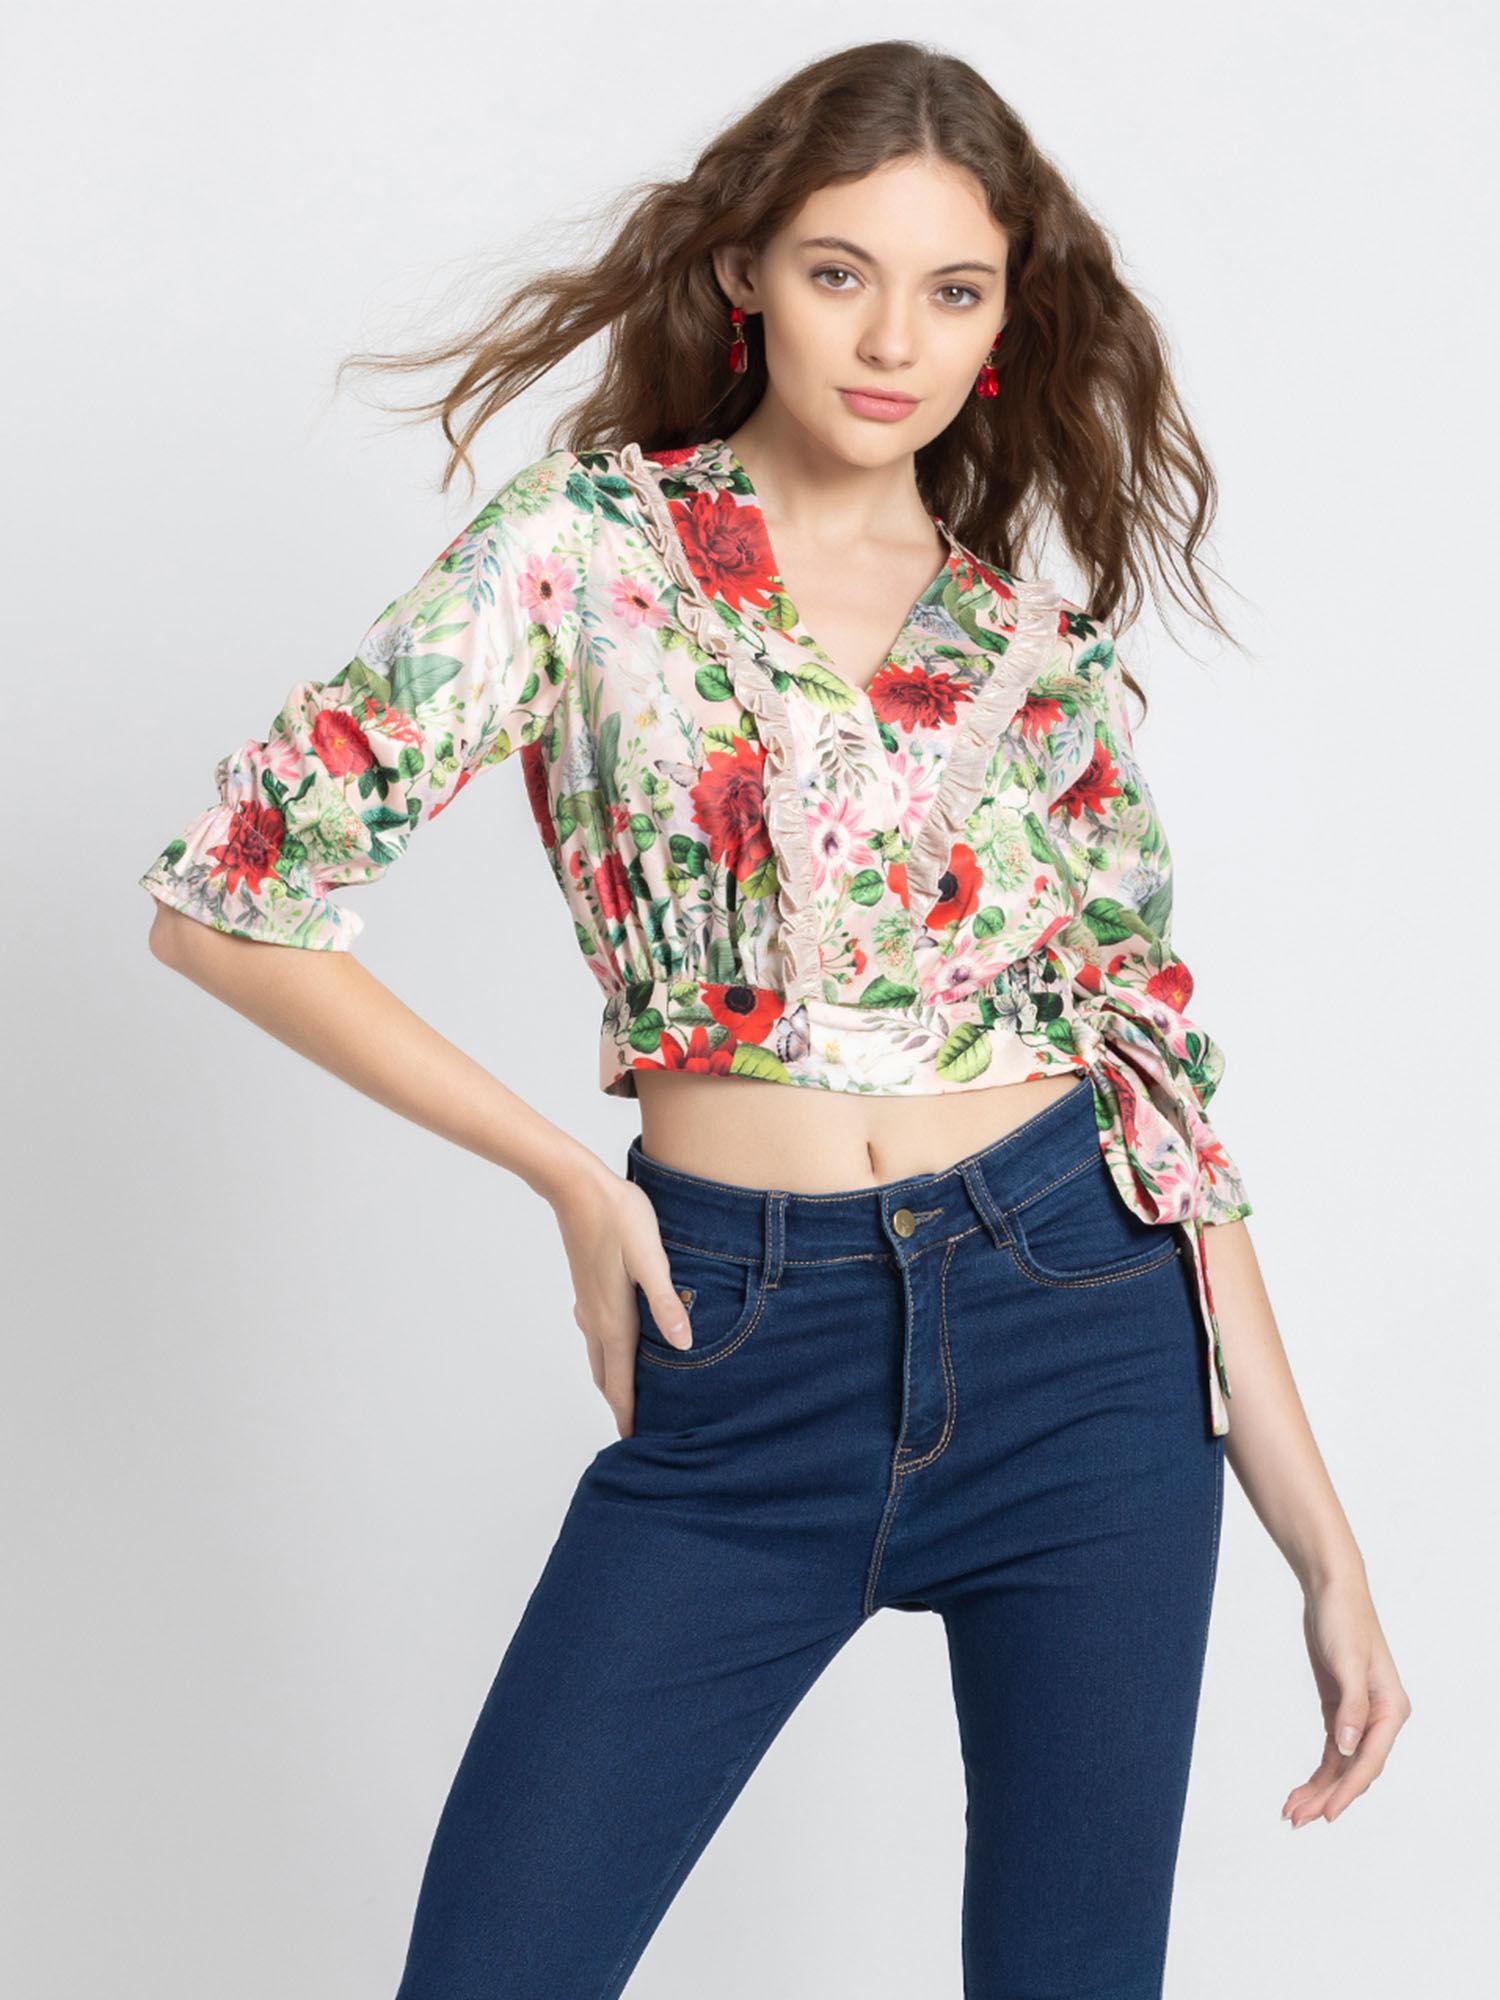 v-neck multi floral print three fourth sleeves party crop tops for women